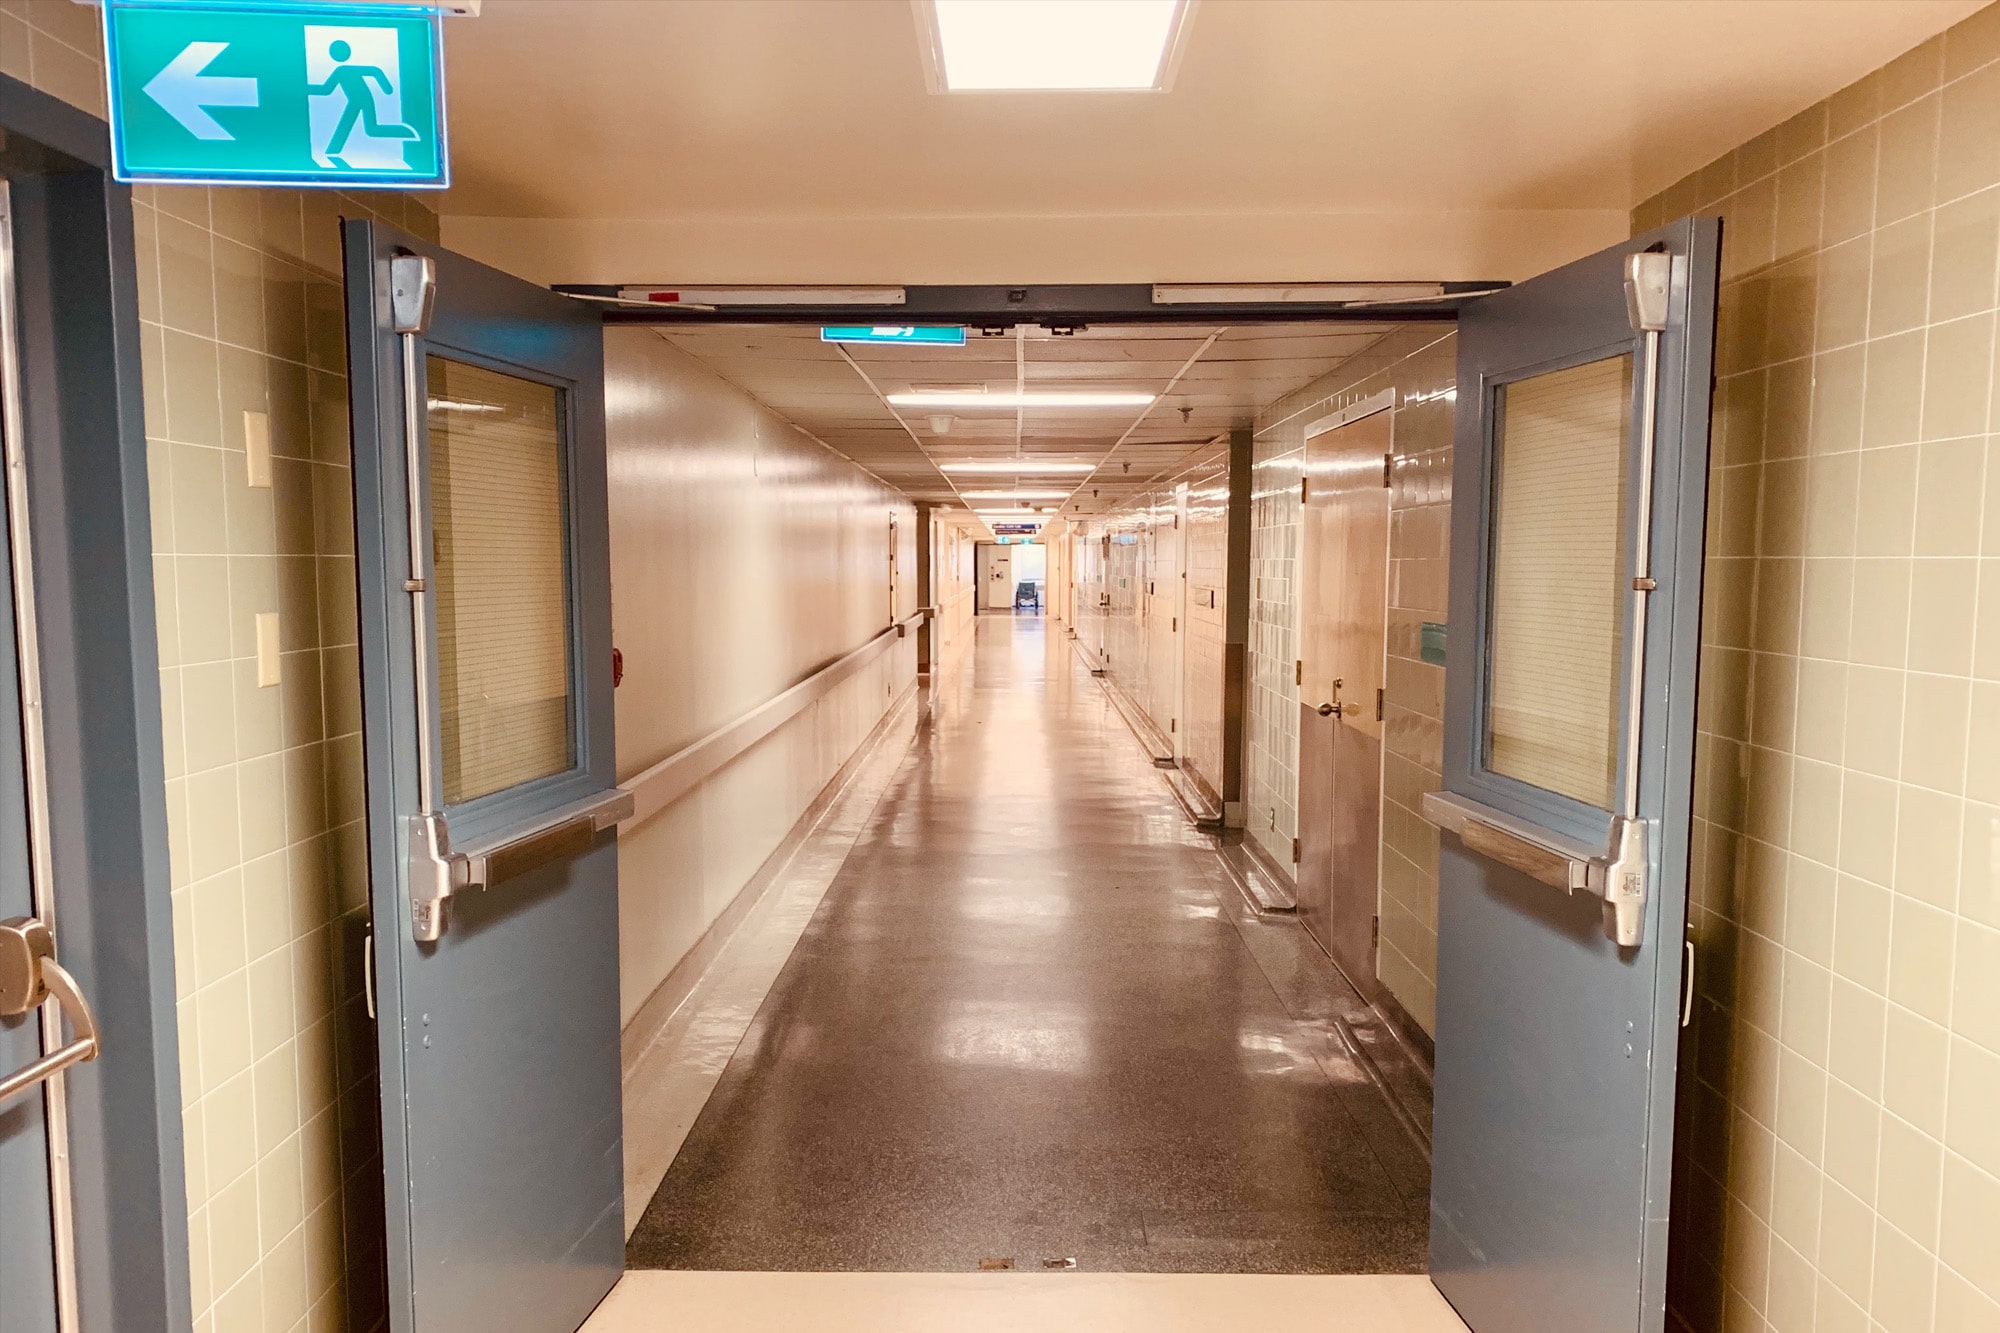 A corridor in a hospital with double doors open